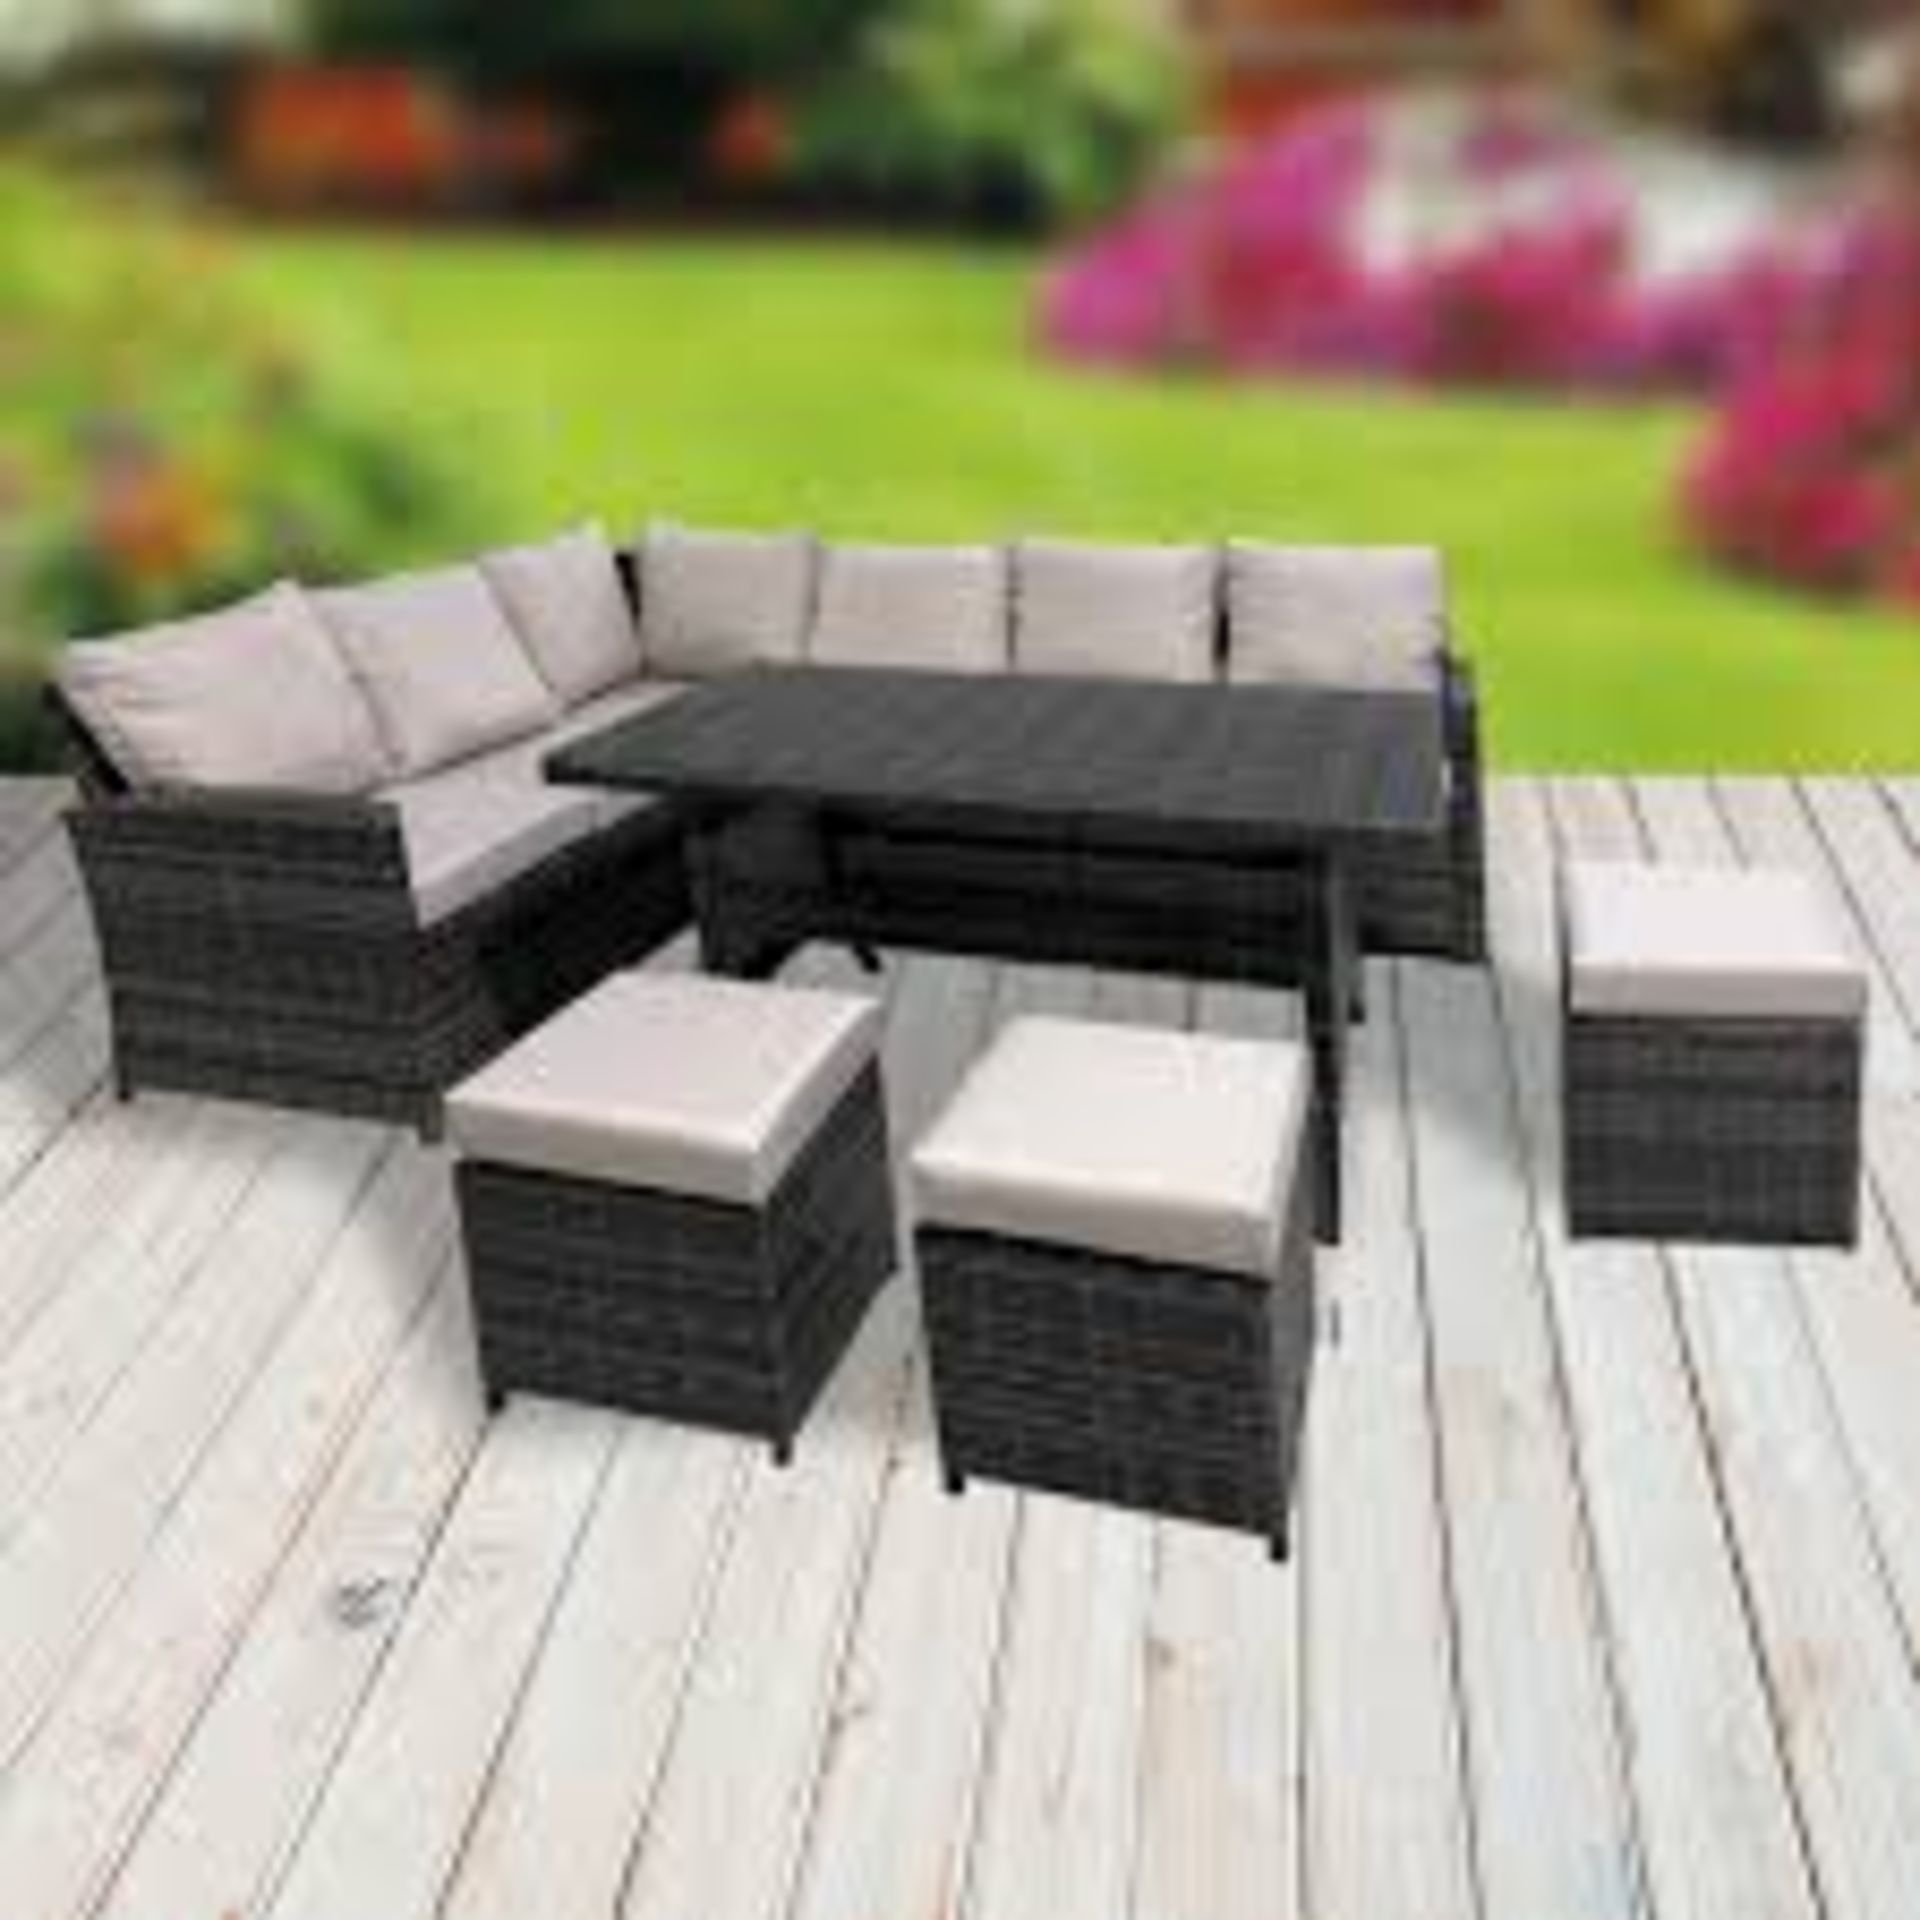 6 SEATER OUTDOOR CORNER DINING SET, SOFT REMOVABLE CUSHIONS, STRONG AND DURABLE, PERFECT FOR YOUR